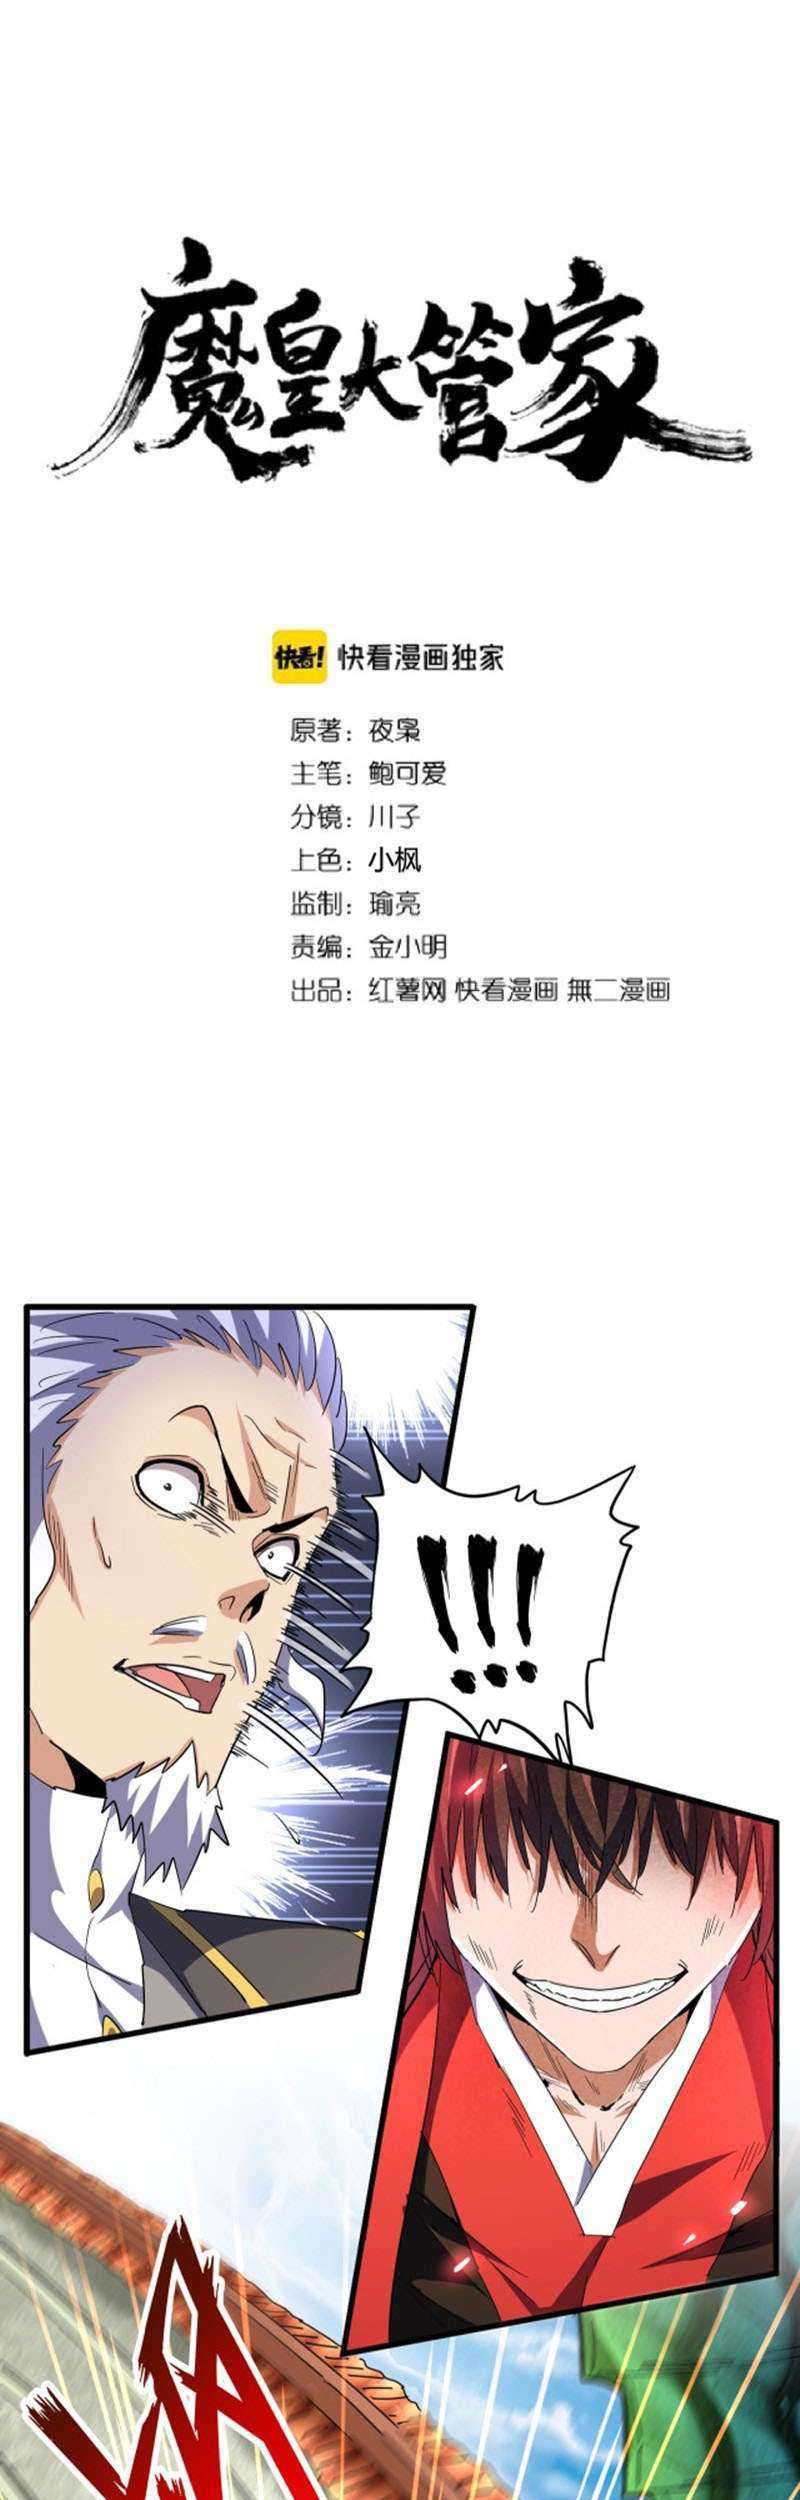 Magic Emperor Chapter 191 Image 1